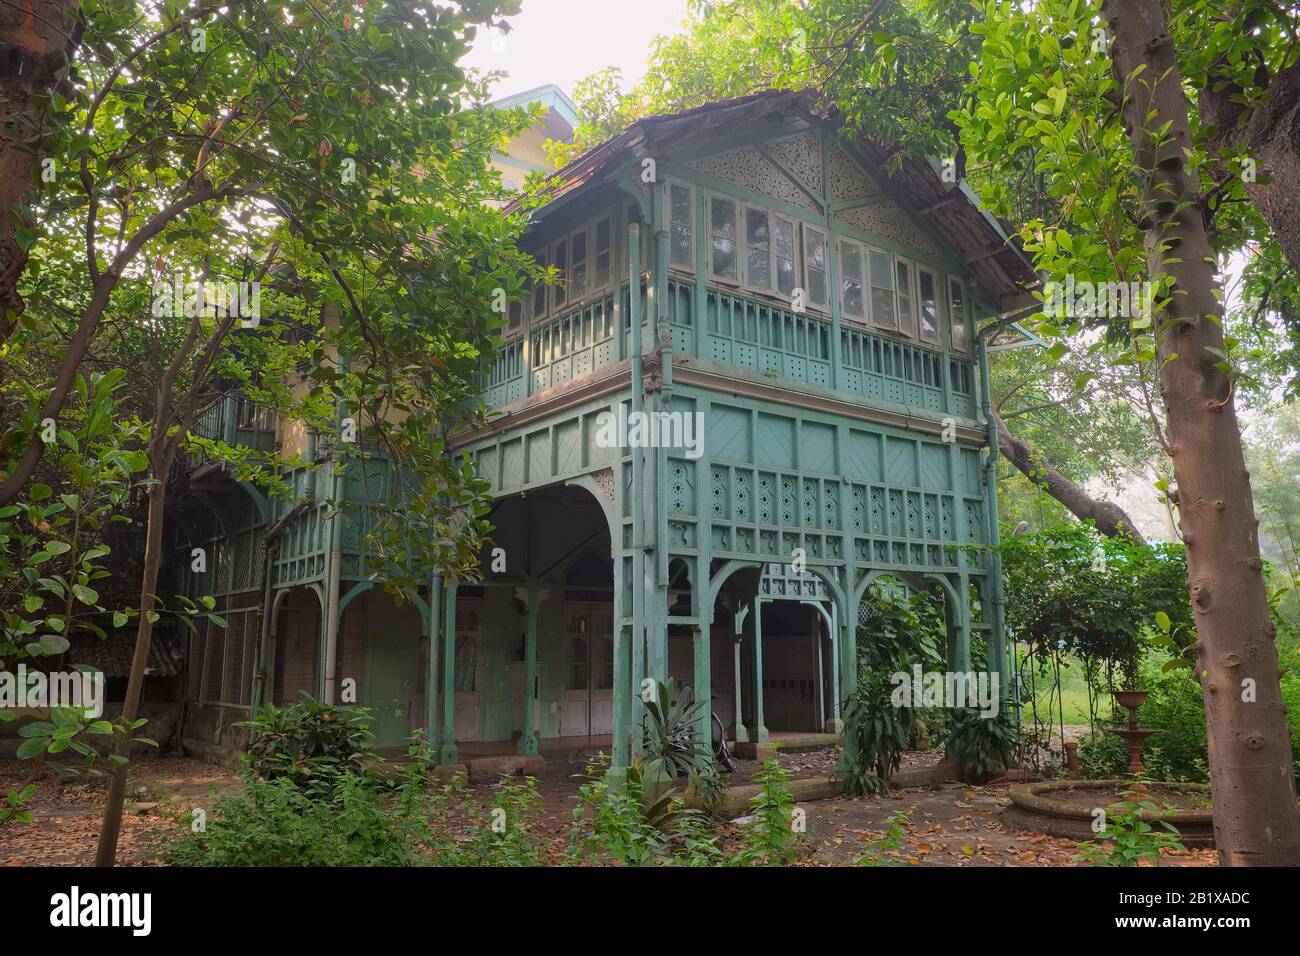 The wooden house, in which writer Rudyard Kipling was born in 1865,  standing in the grounds of Sir J. J. School of Art in Mumbai (Bombay),  India Stock Photo - Alamy